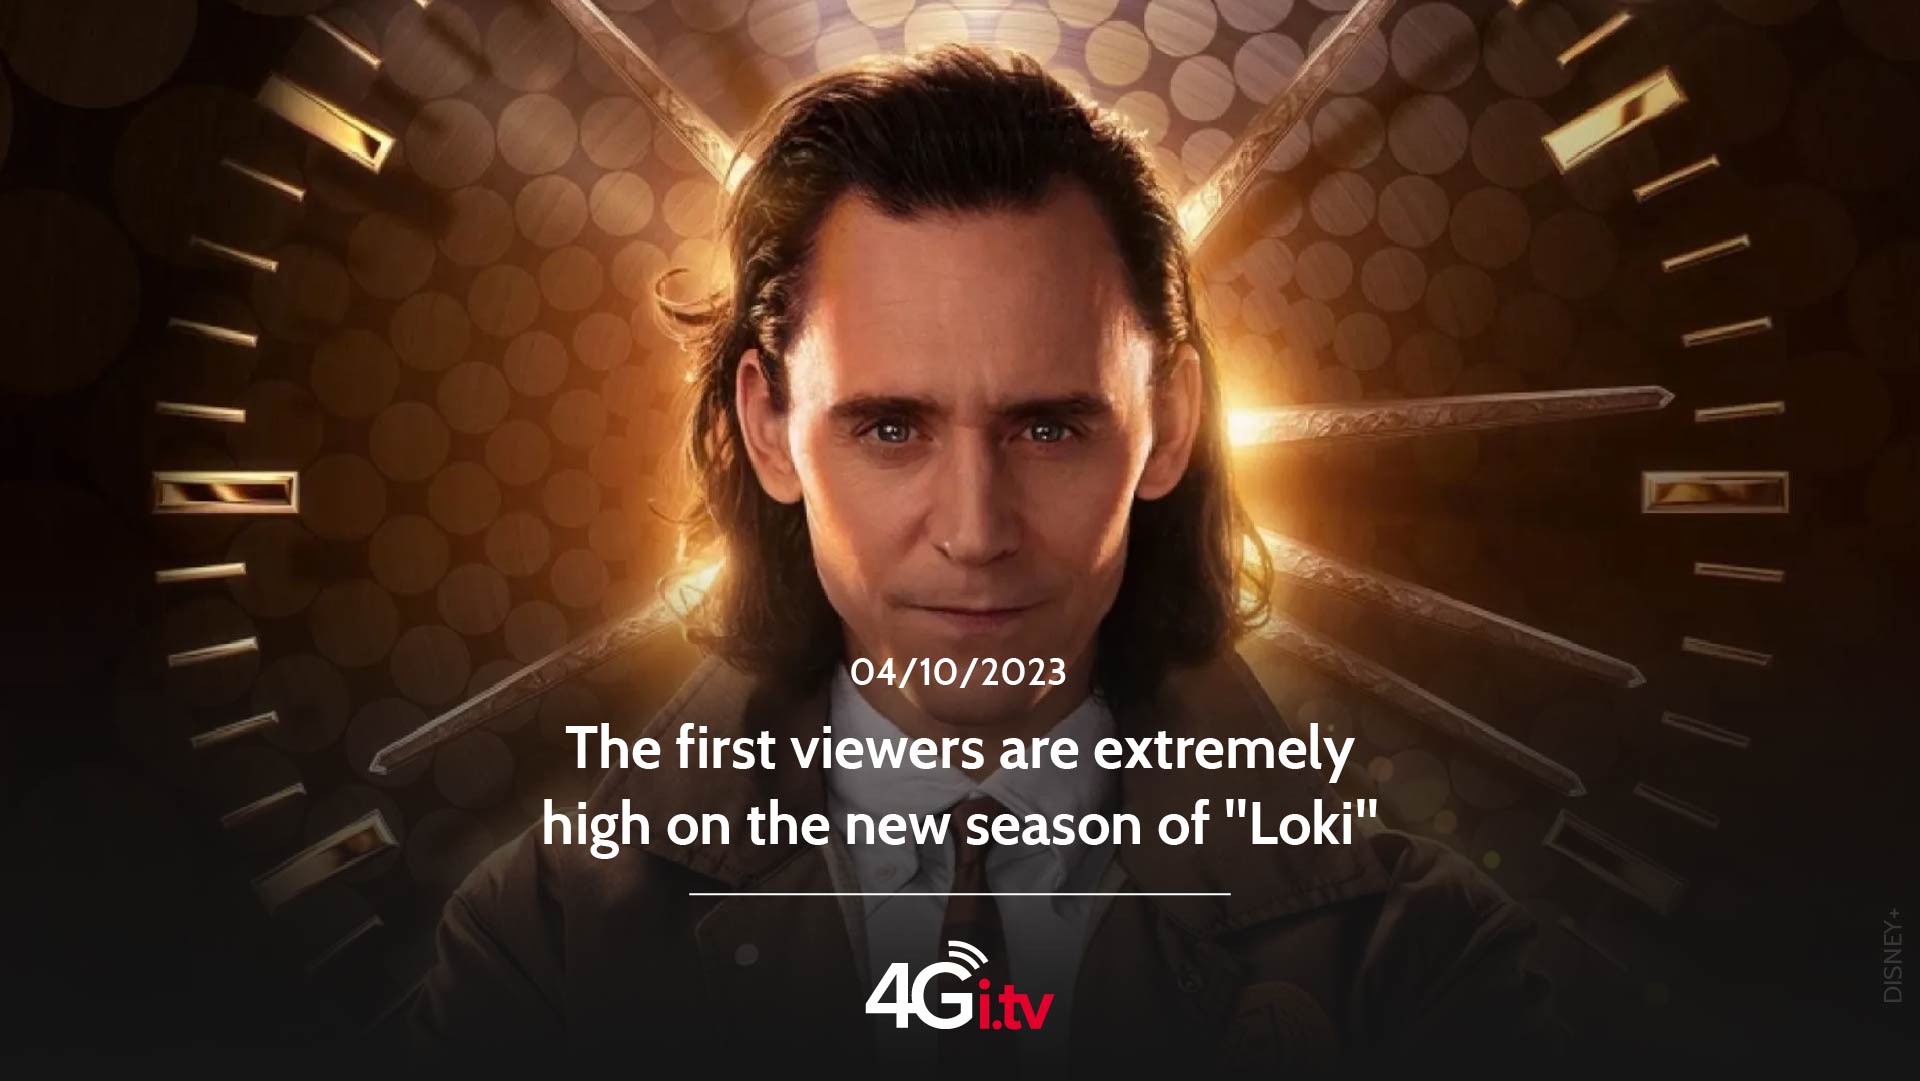 Lesen Sie mehr über den Artikel The first viewers are extremely high on the new season of “Loki”